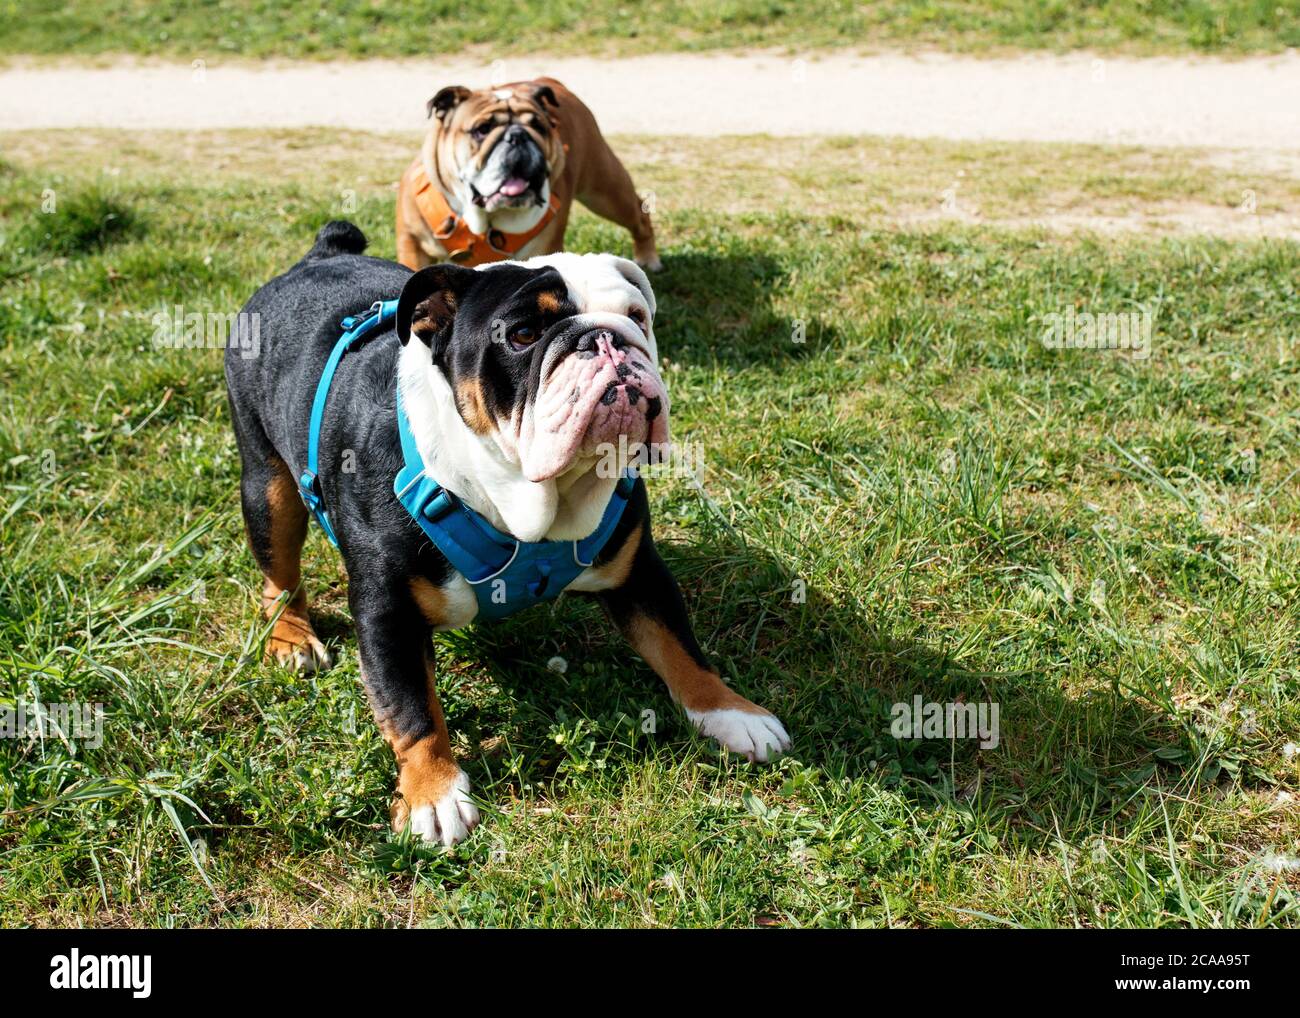 Black and white English Bulldog in blue harnes juming and catching a ball on the grass Stock Photo